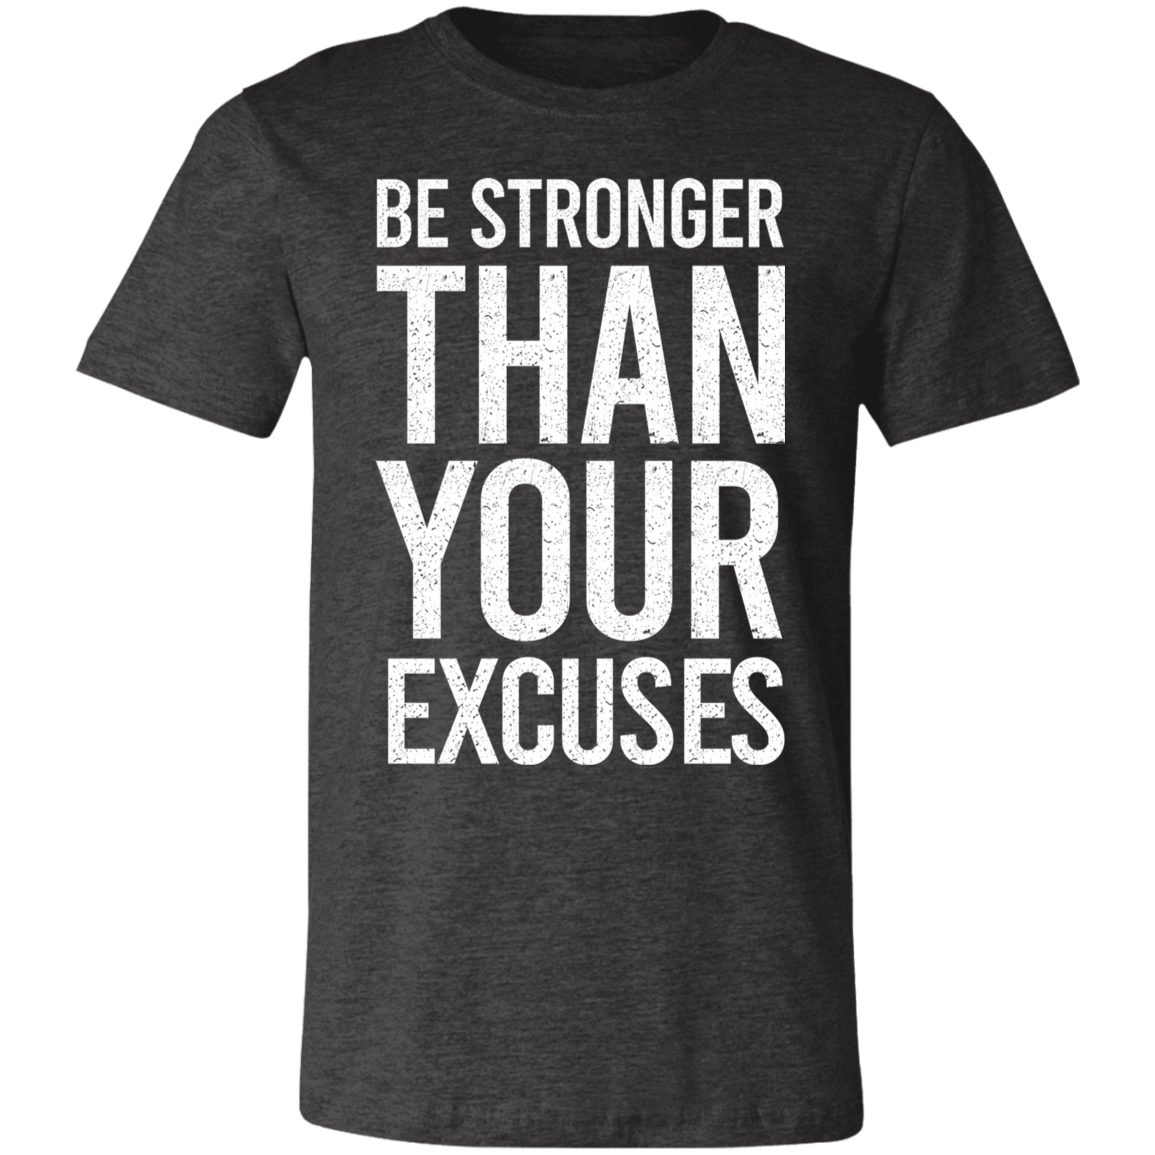 Be Stronger than your Excuses Premium Women's Tee